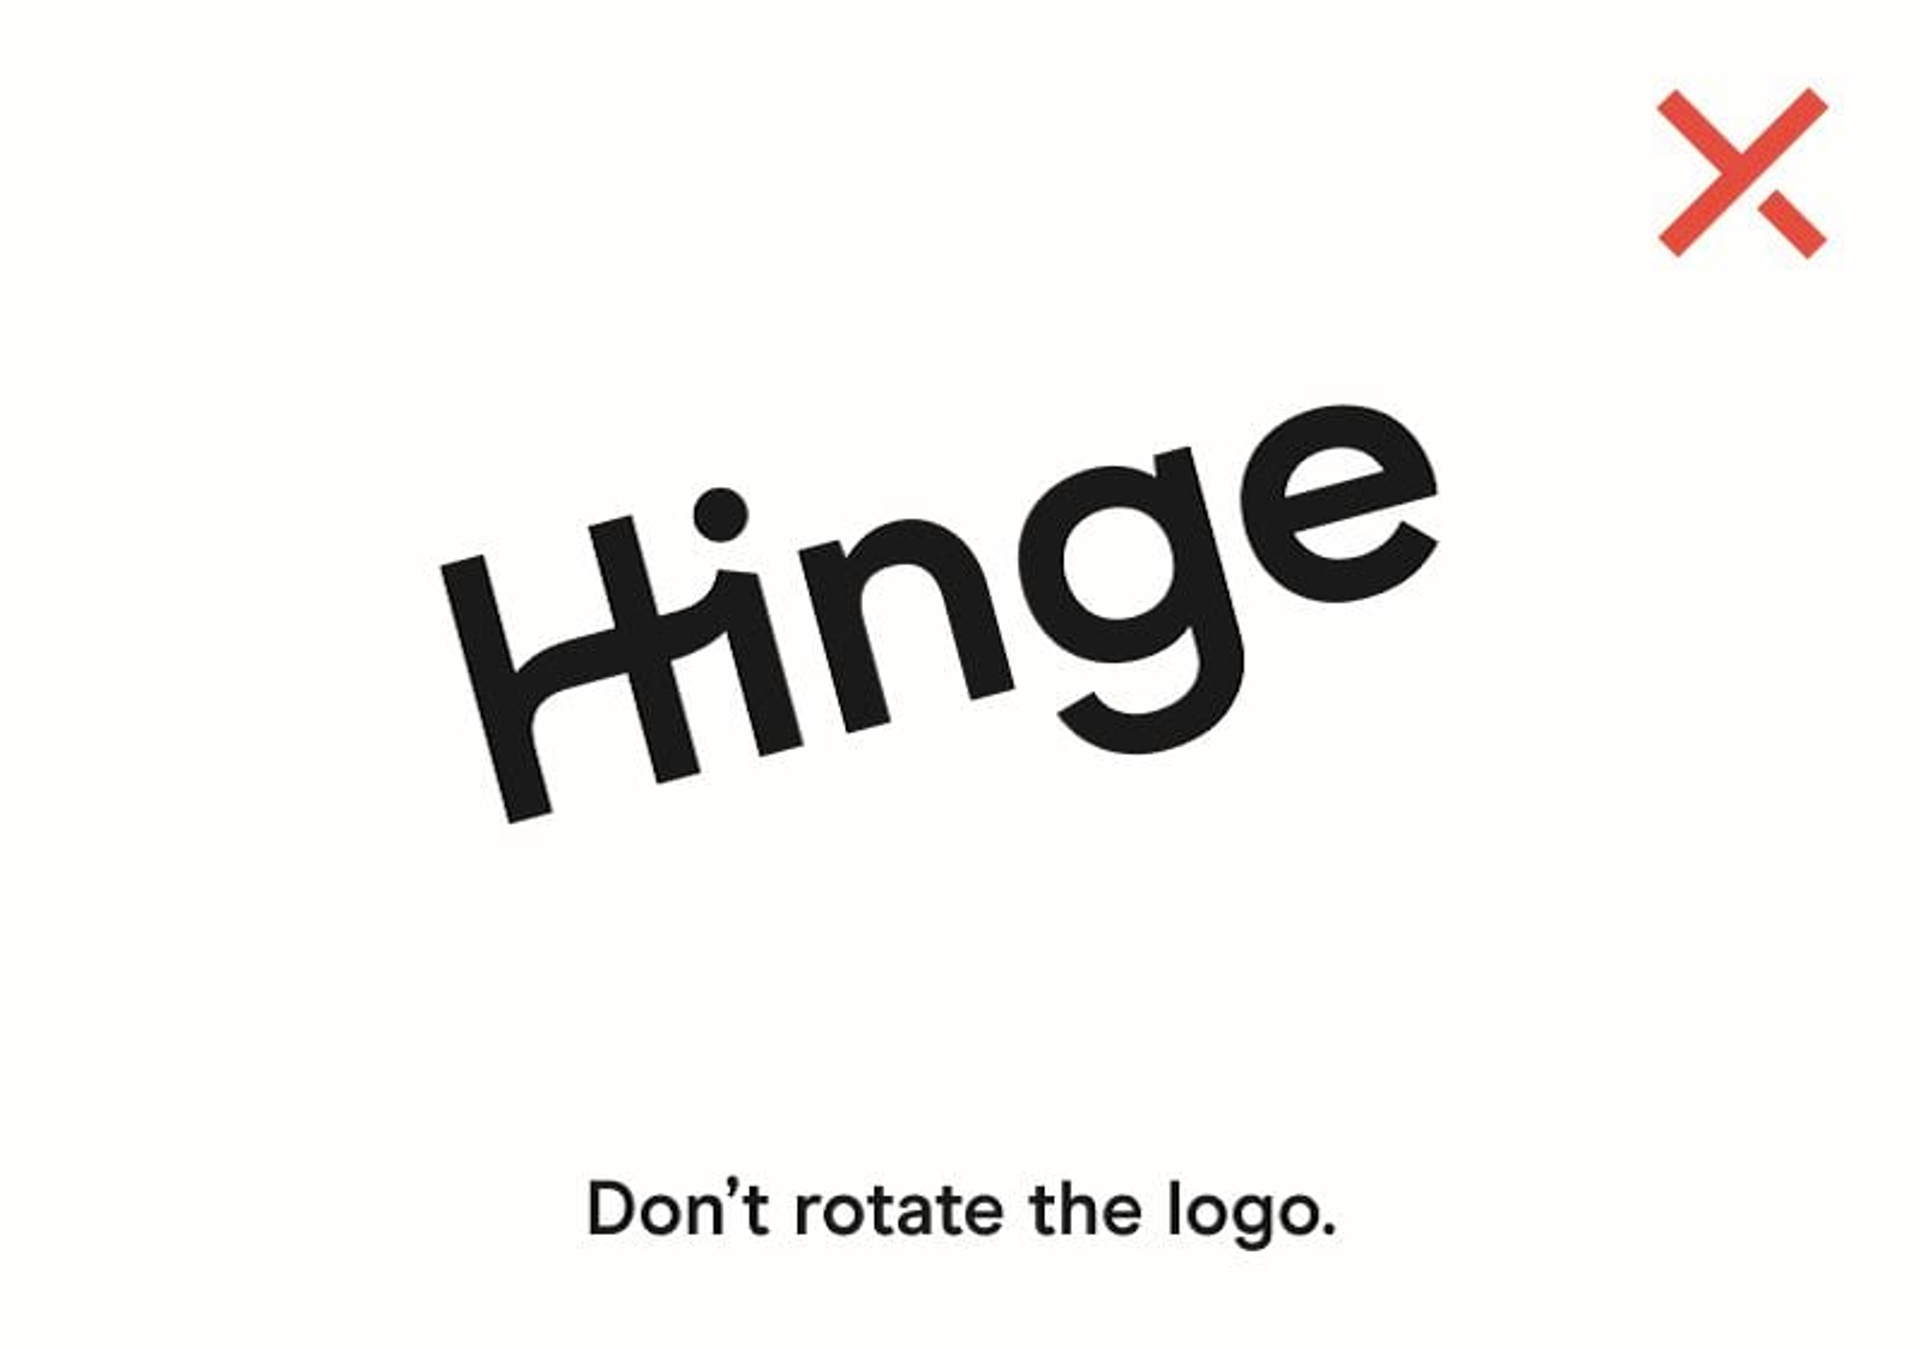 Don't rotate the logo.